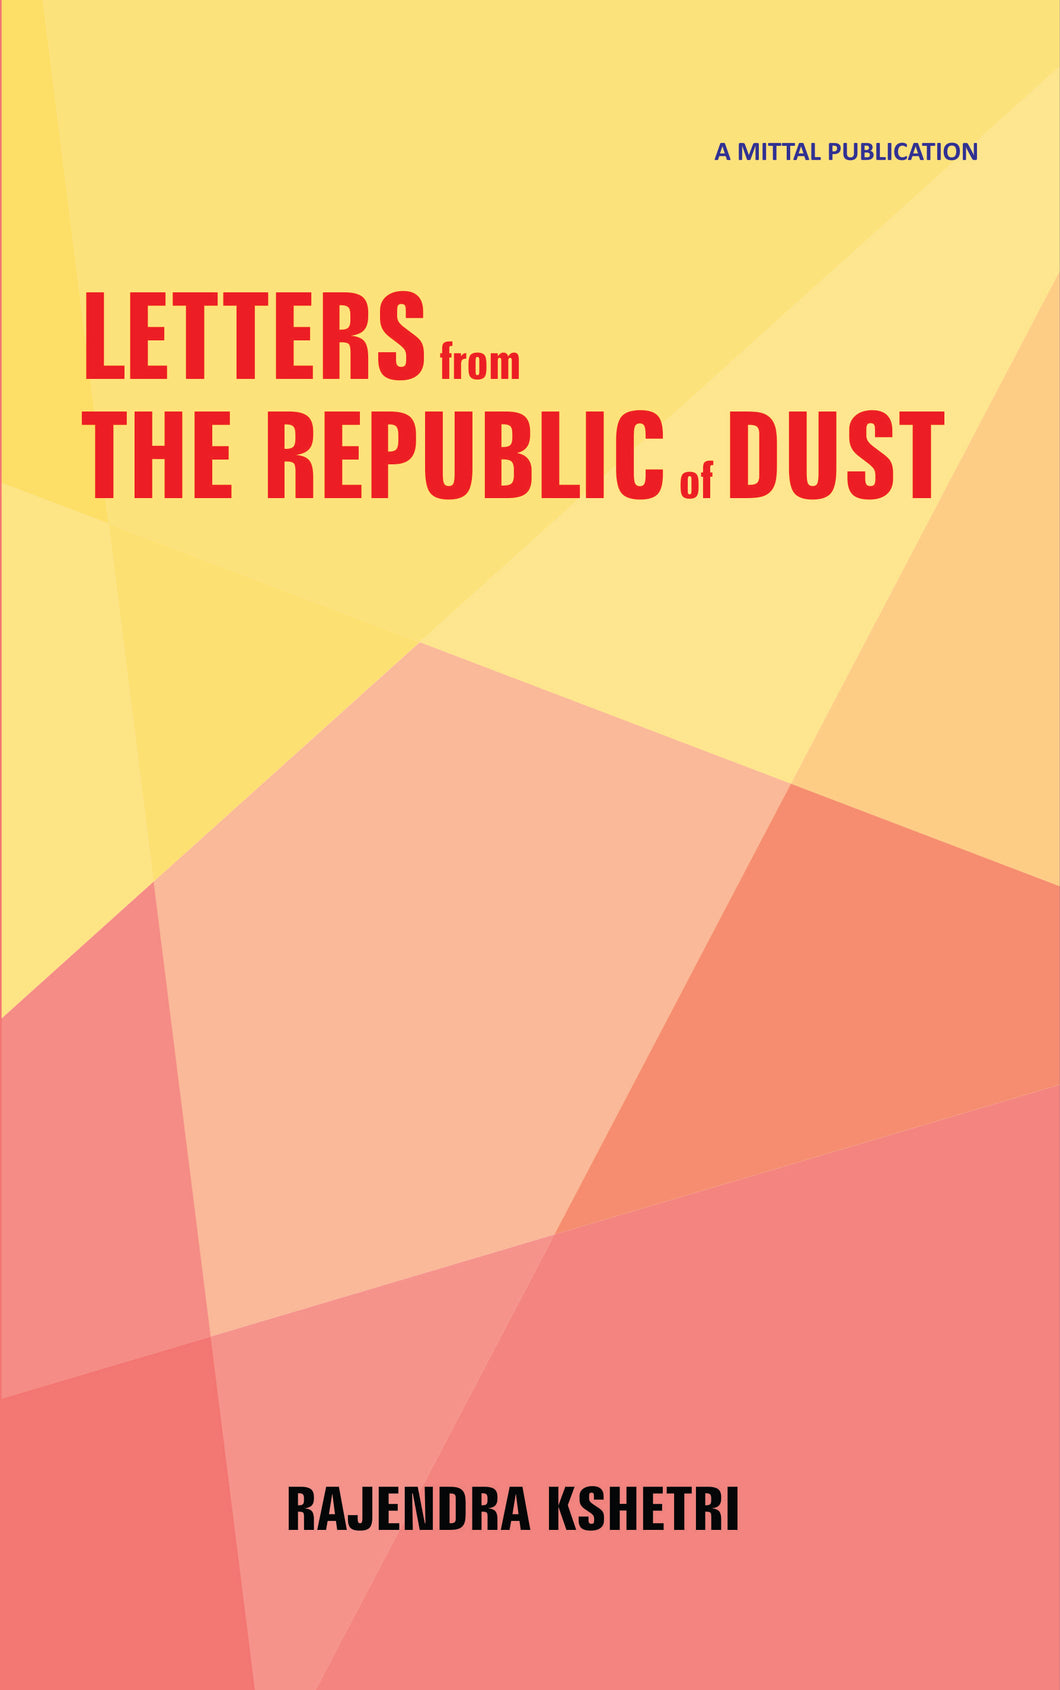 Letters from the Republic of Dust [PB] by Rajendra Kshetri